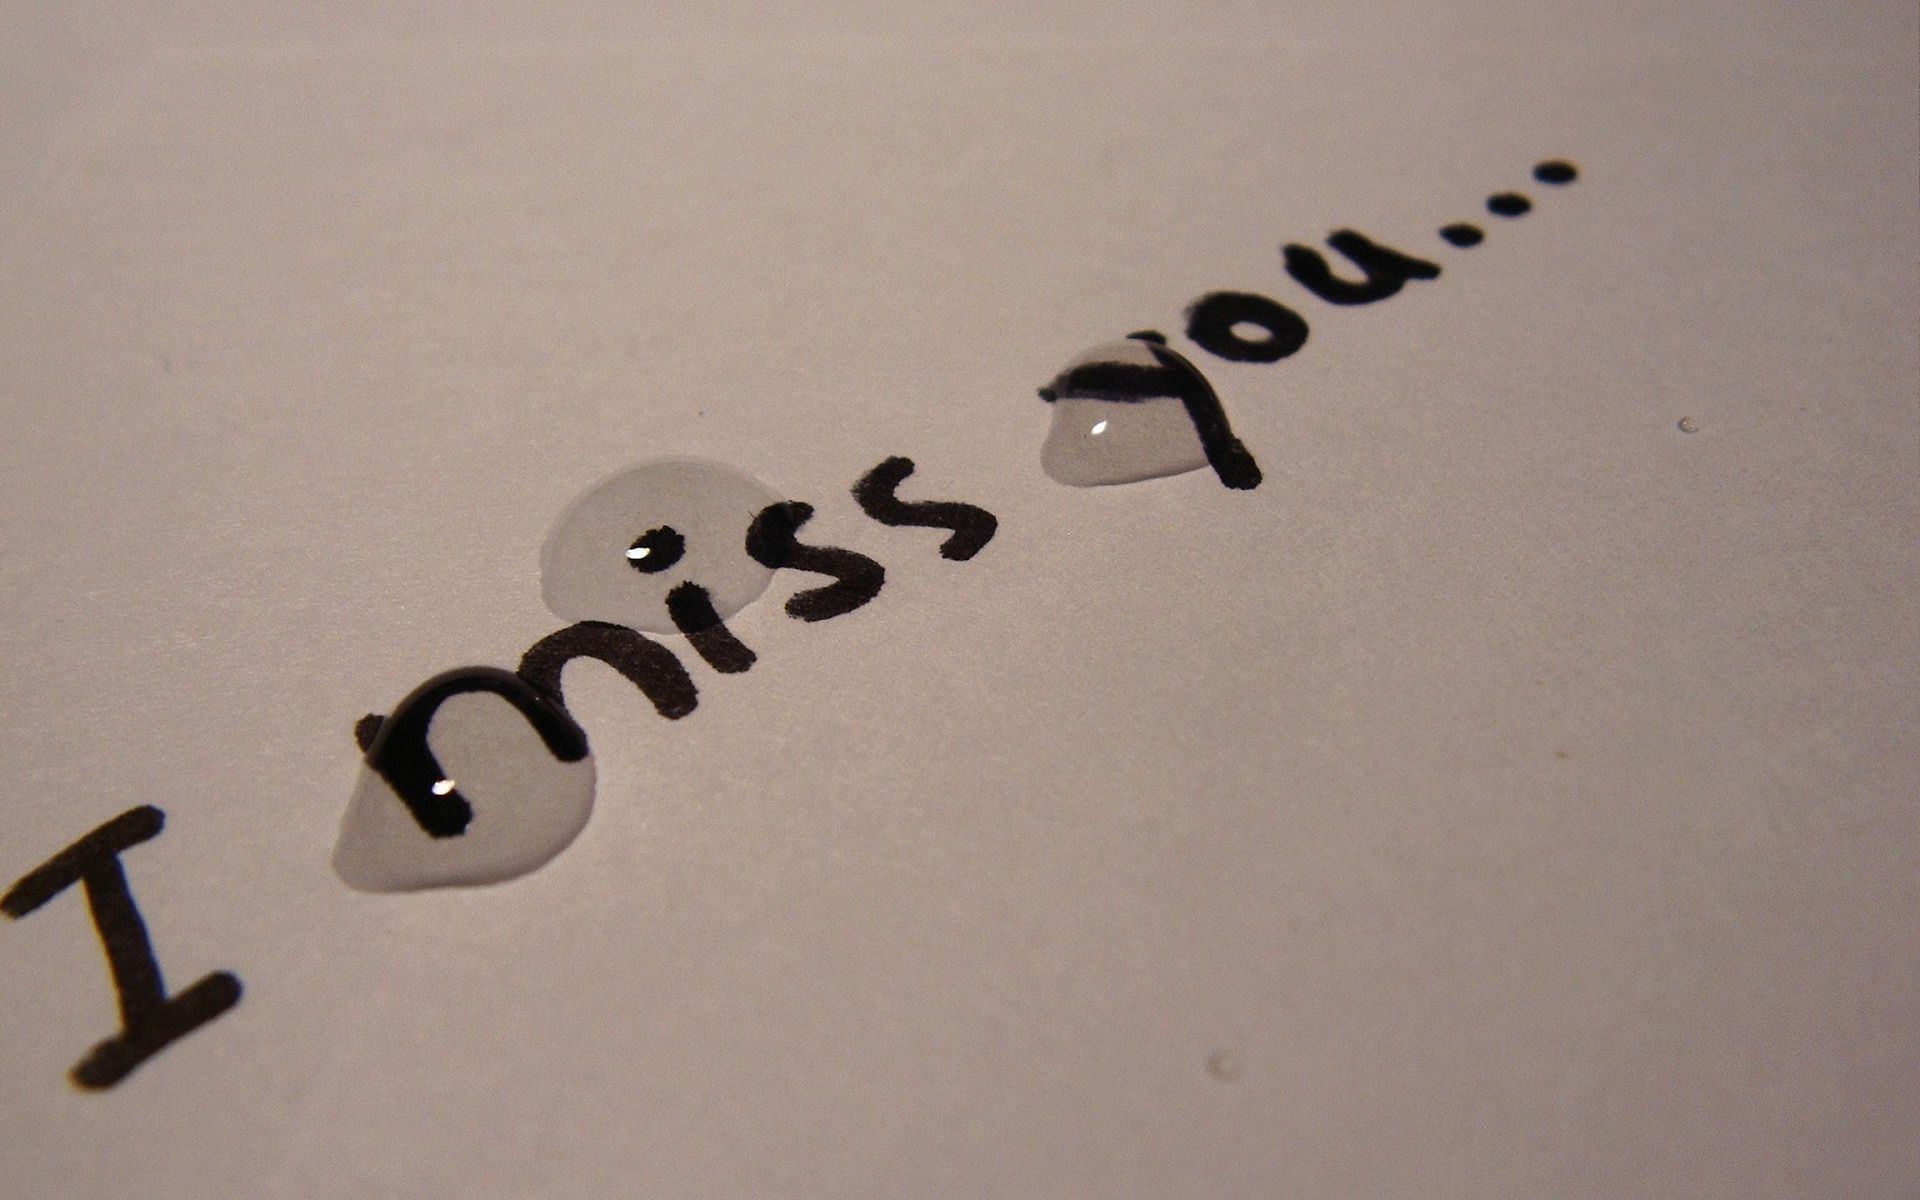 1920x1200  I Miss You Wallpapers – I Miss You Wallpapers Collection for  desktop and mobile